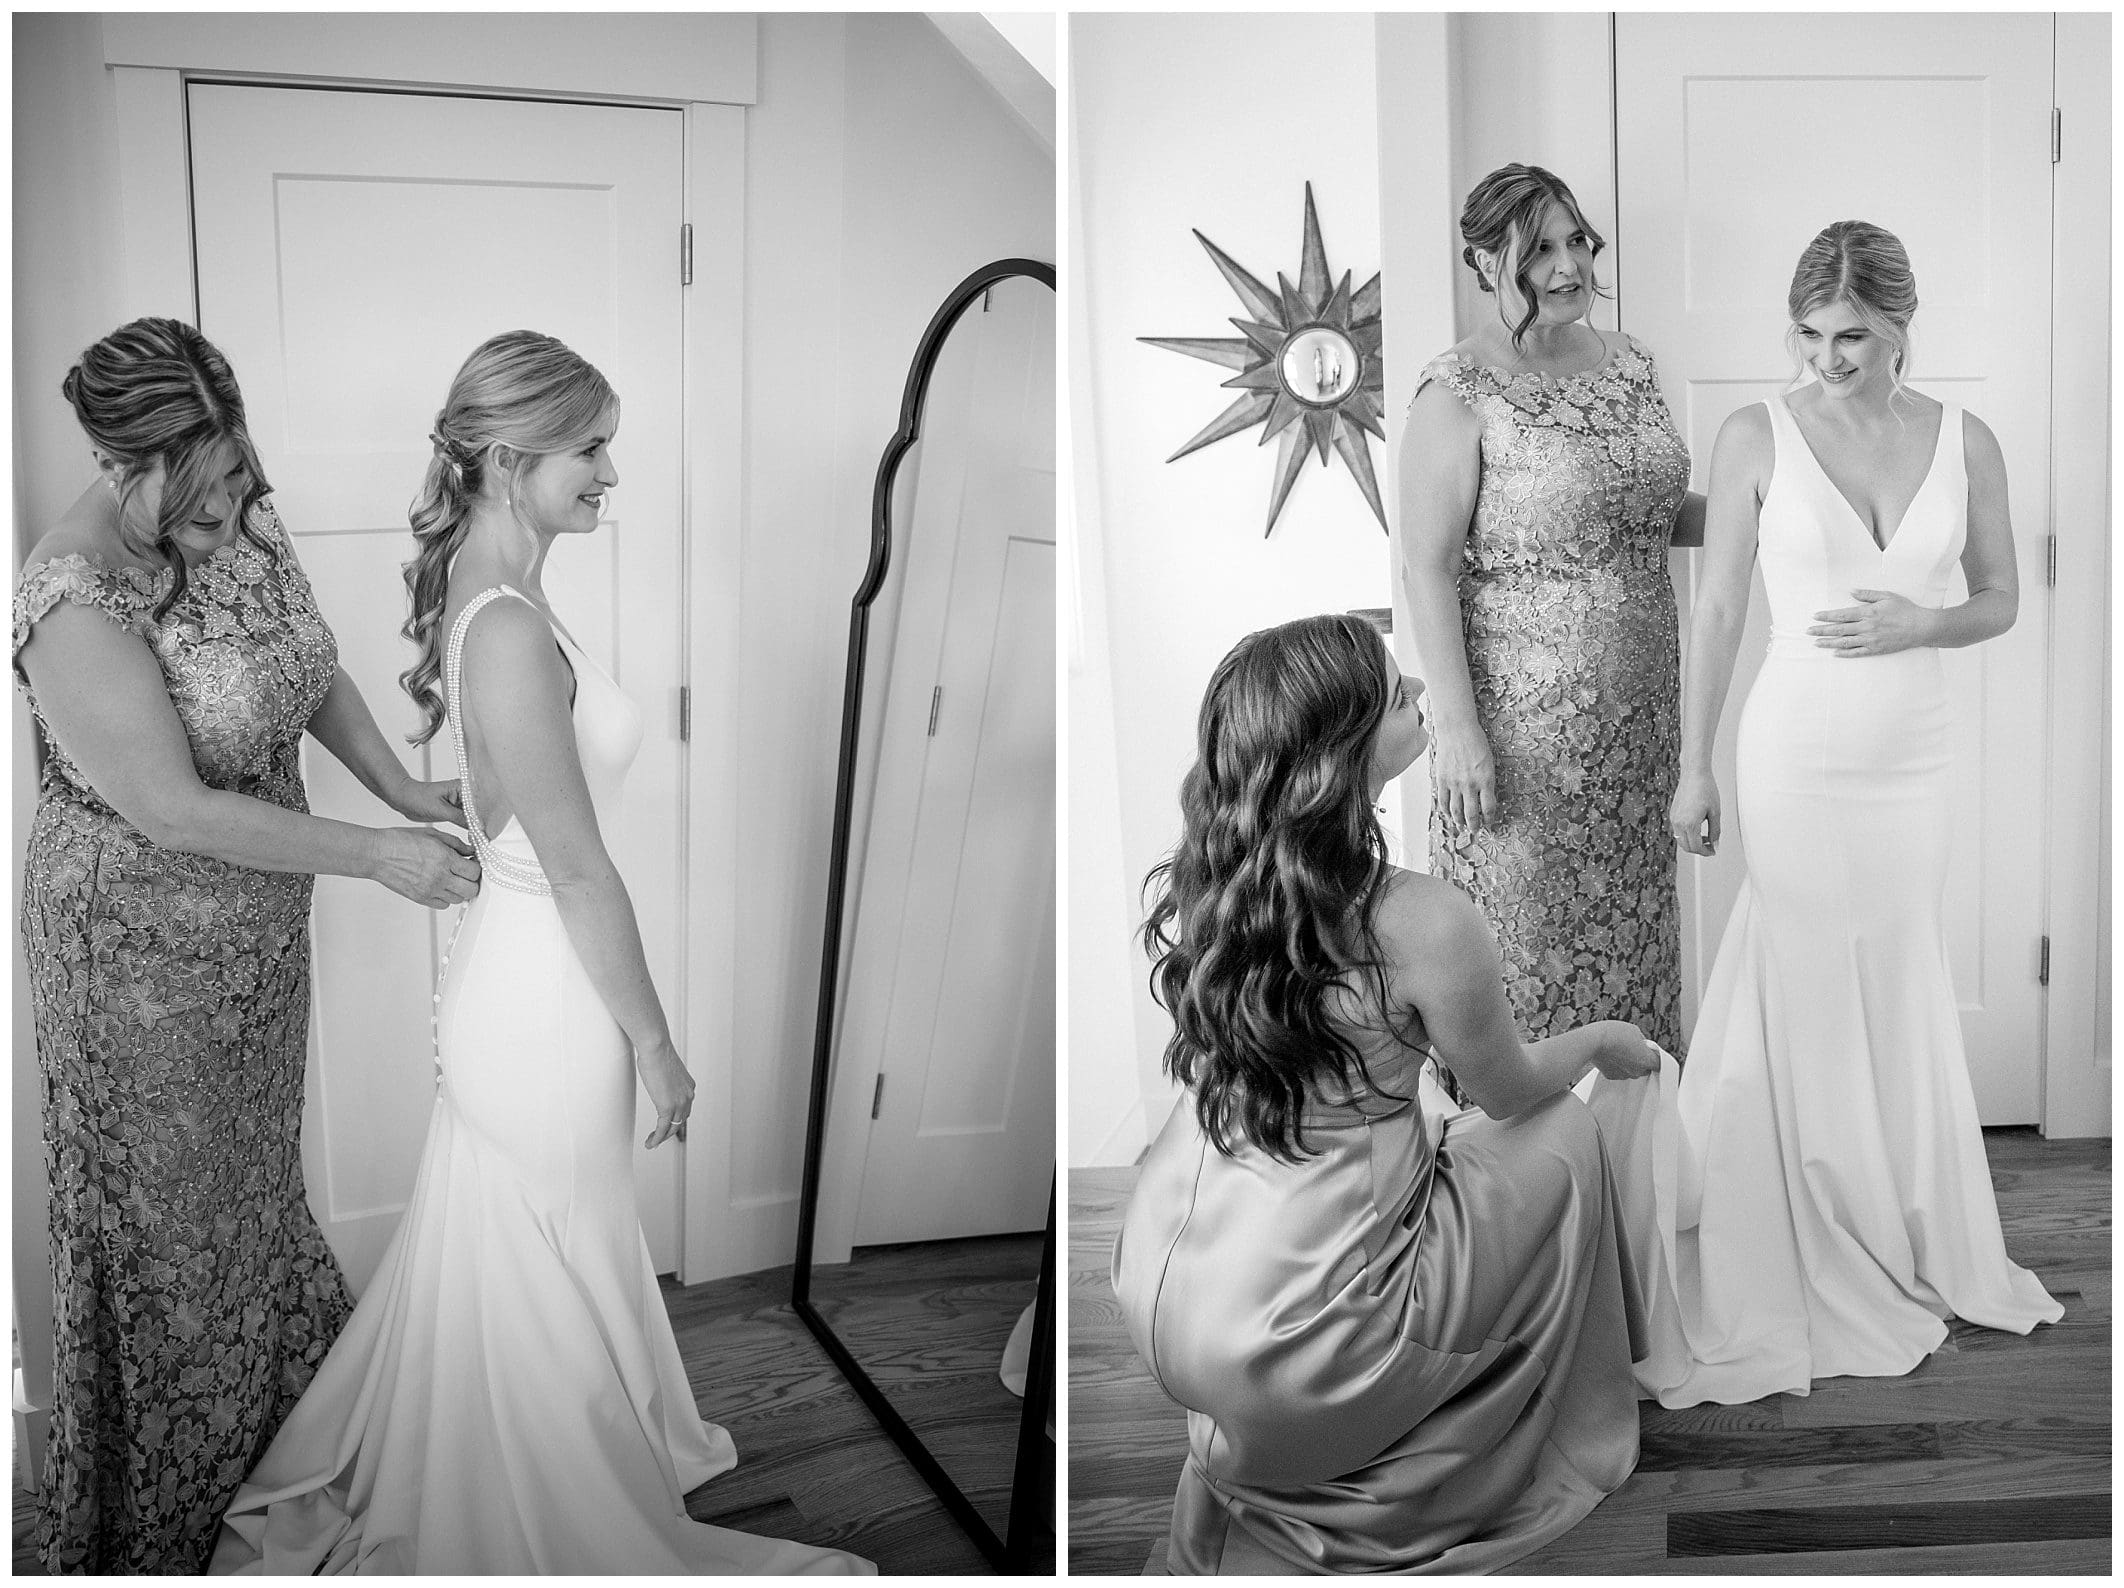 A bride and her bridesmaids getting ready for their fall wedding at Crest Center.